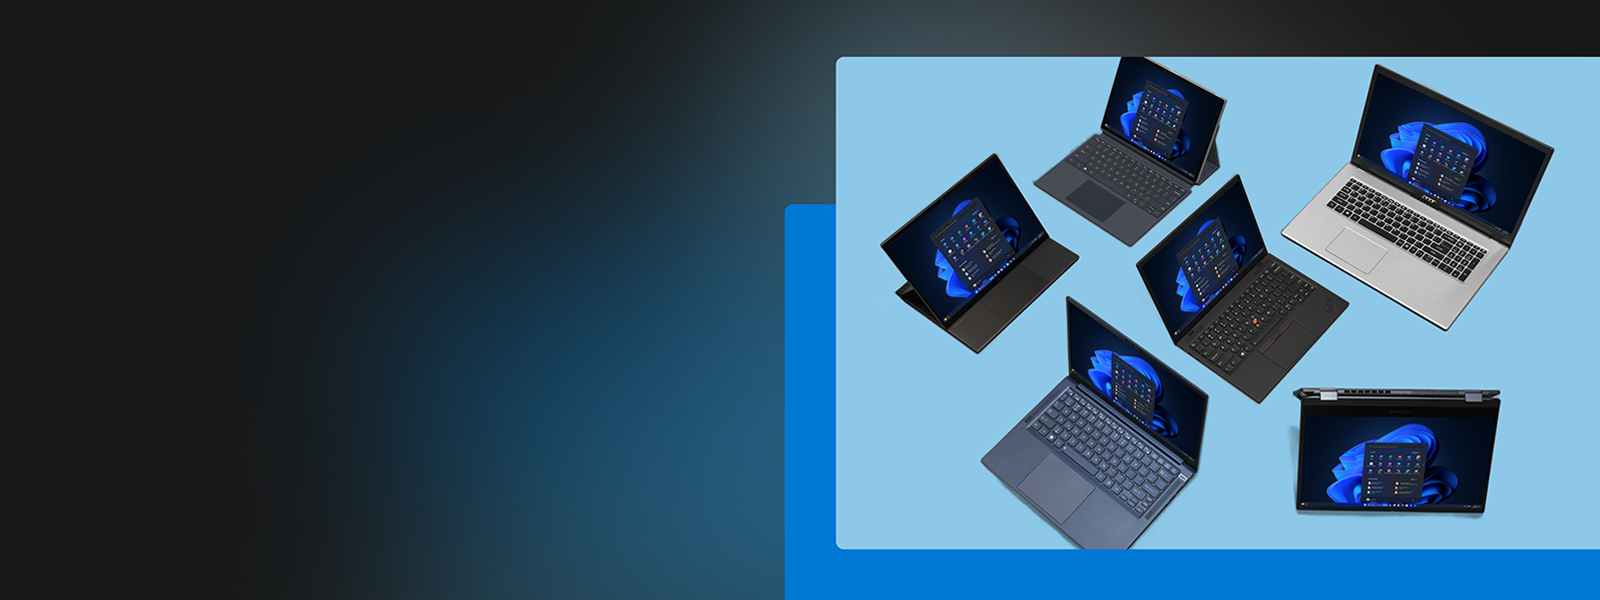 Multiple laptops and two-in-one devices displaying the Windows 11 start screen